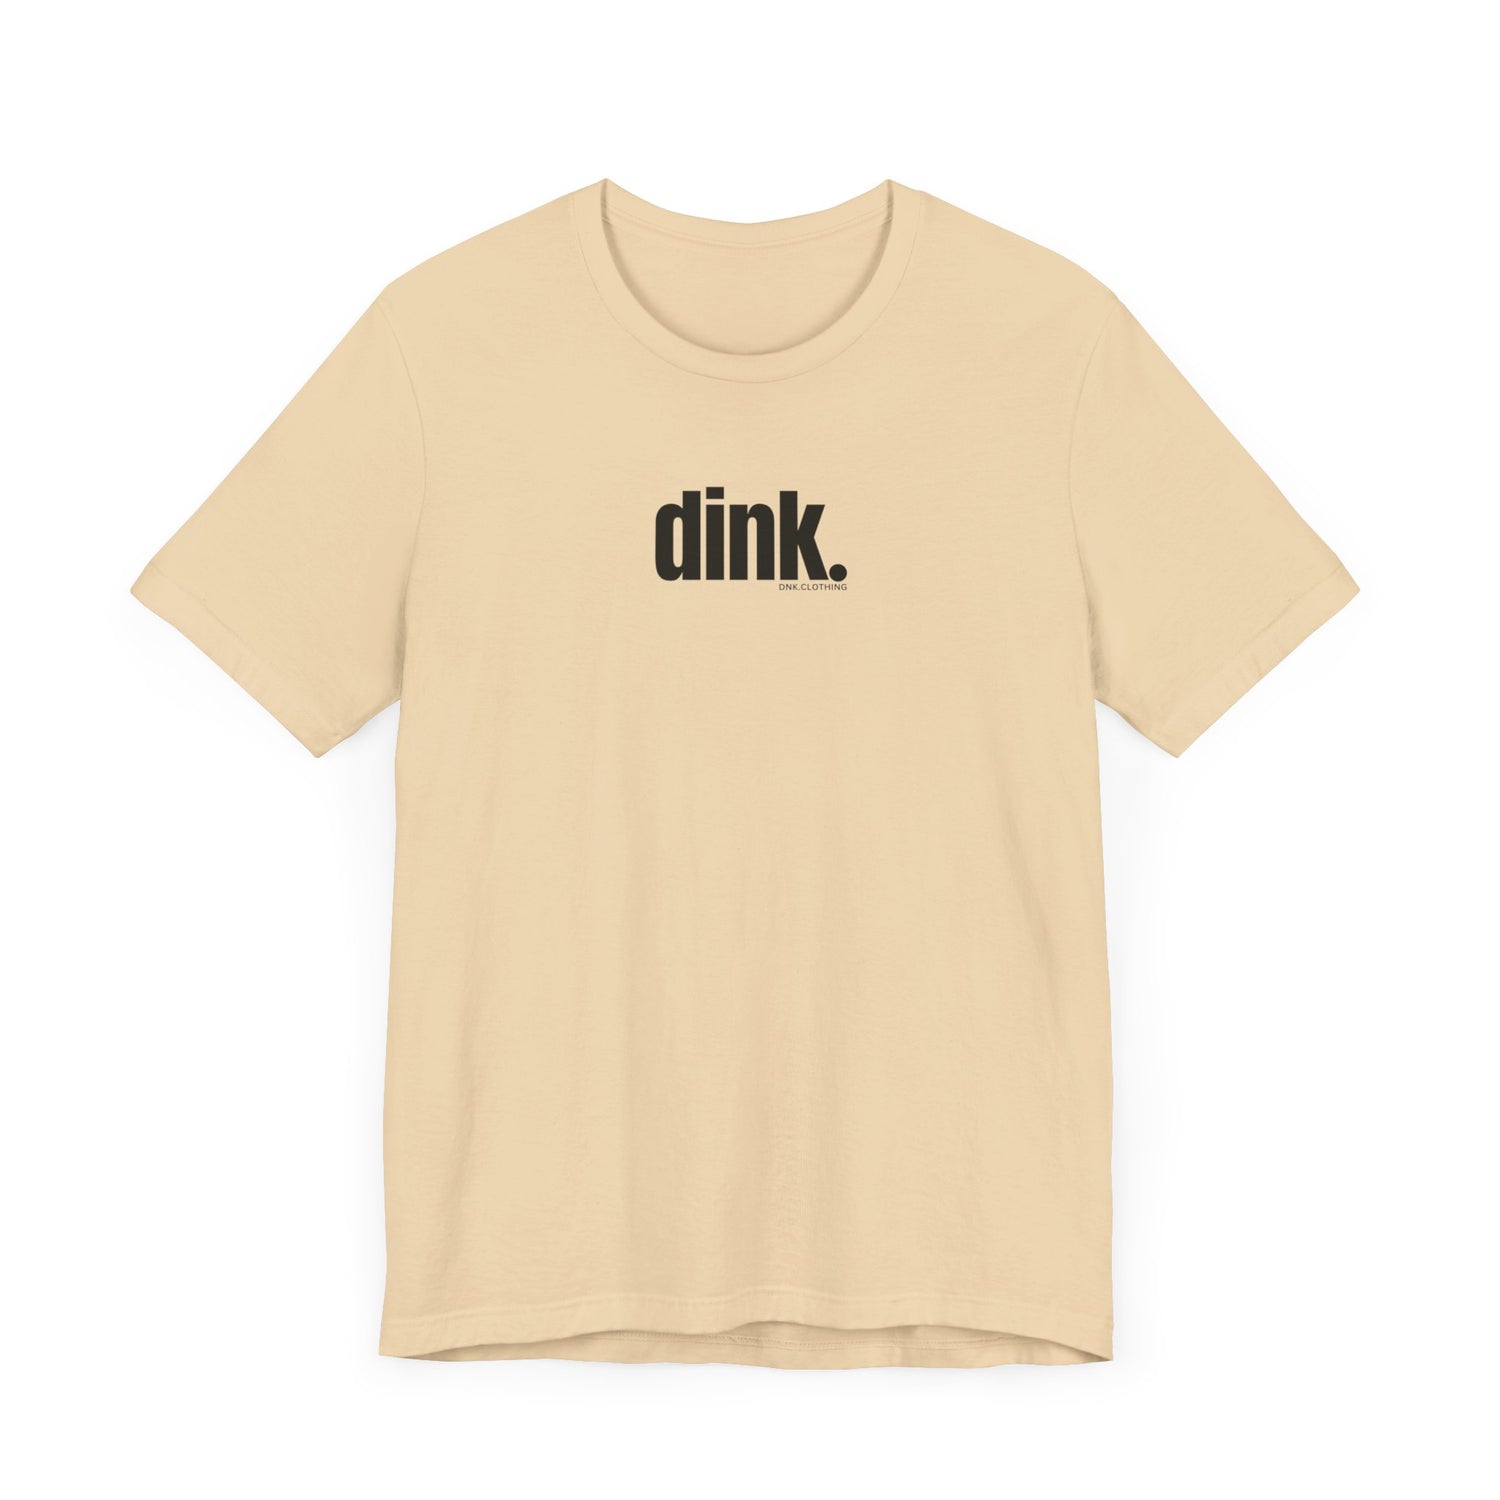 DNK dink. Tee - DNK Clothing